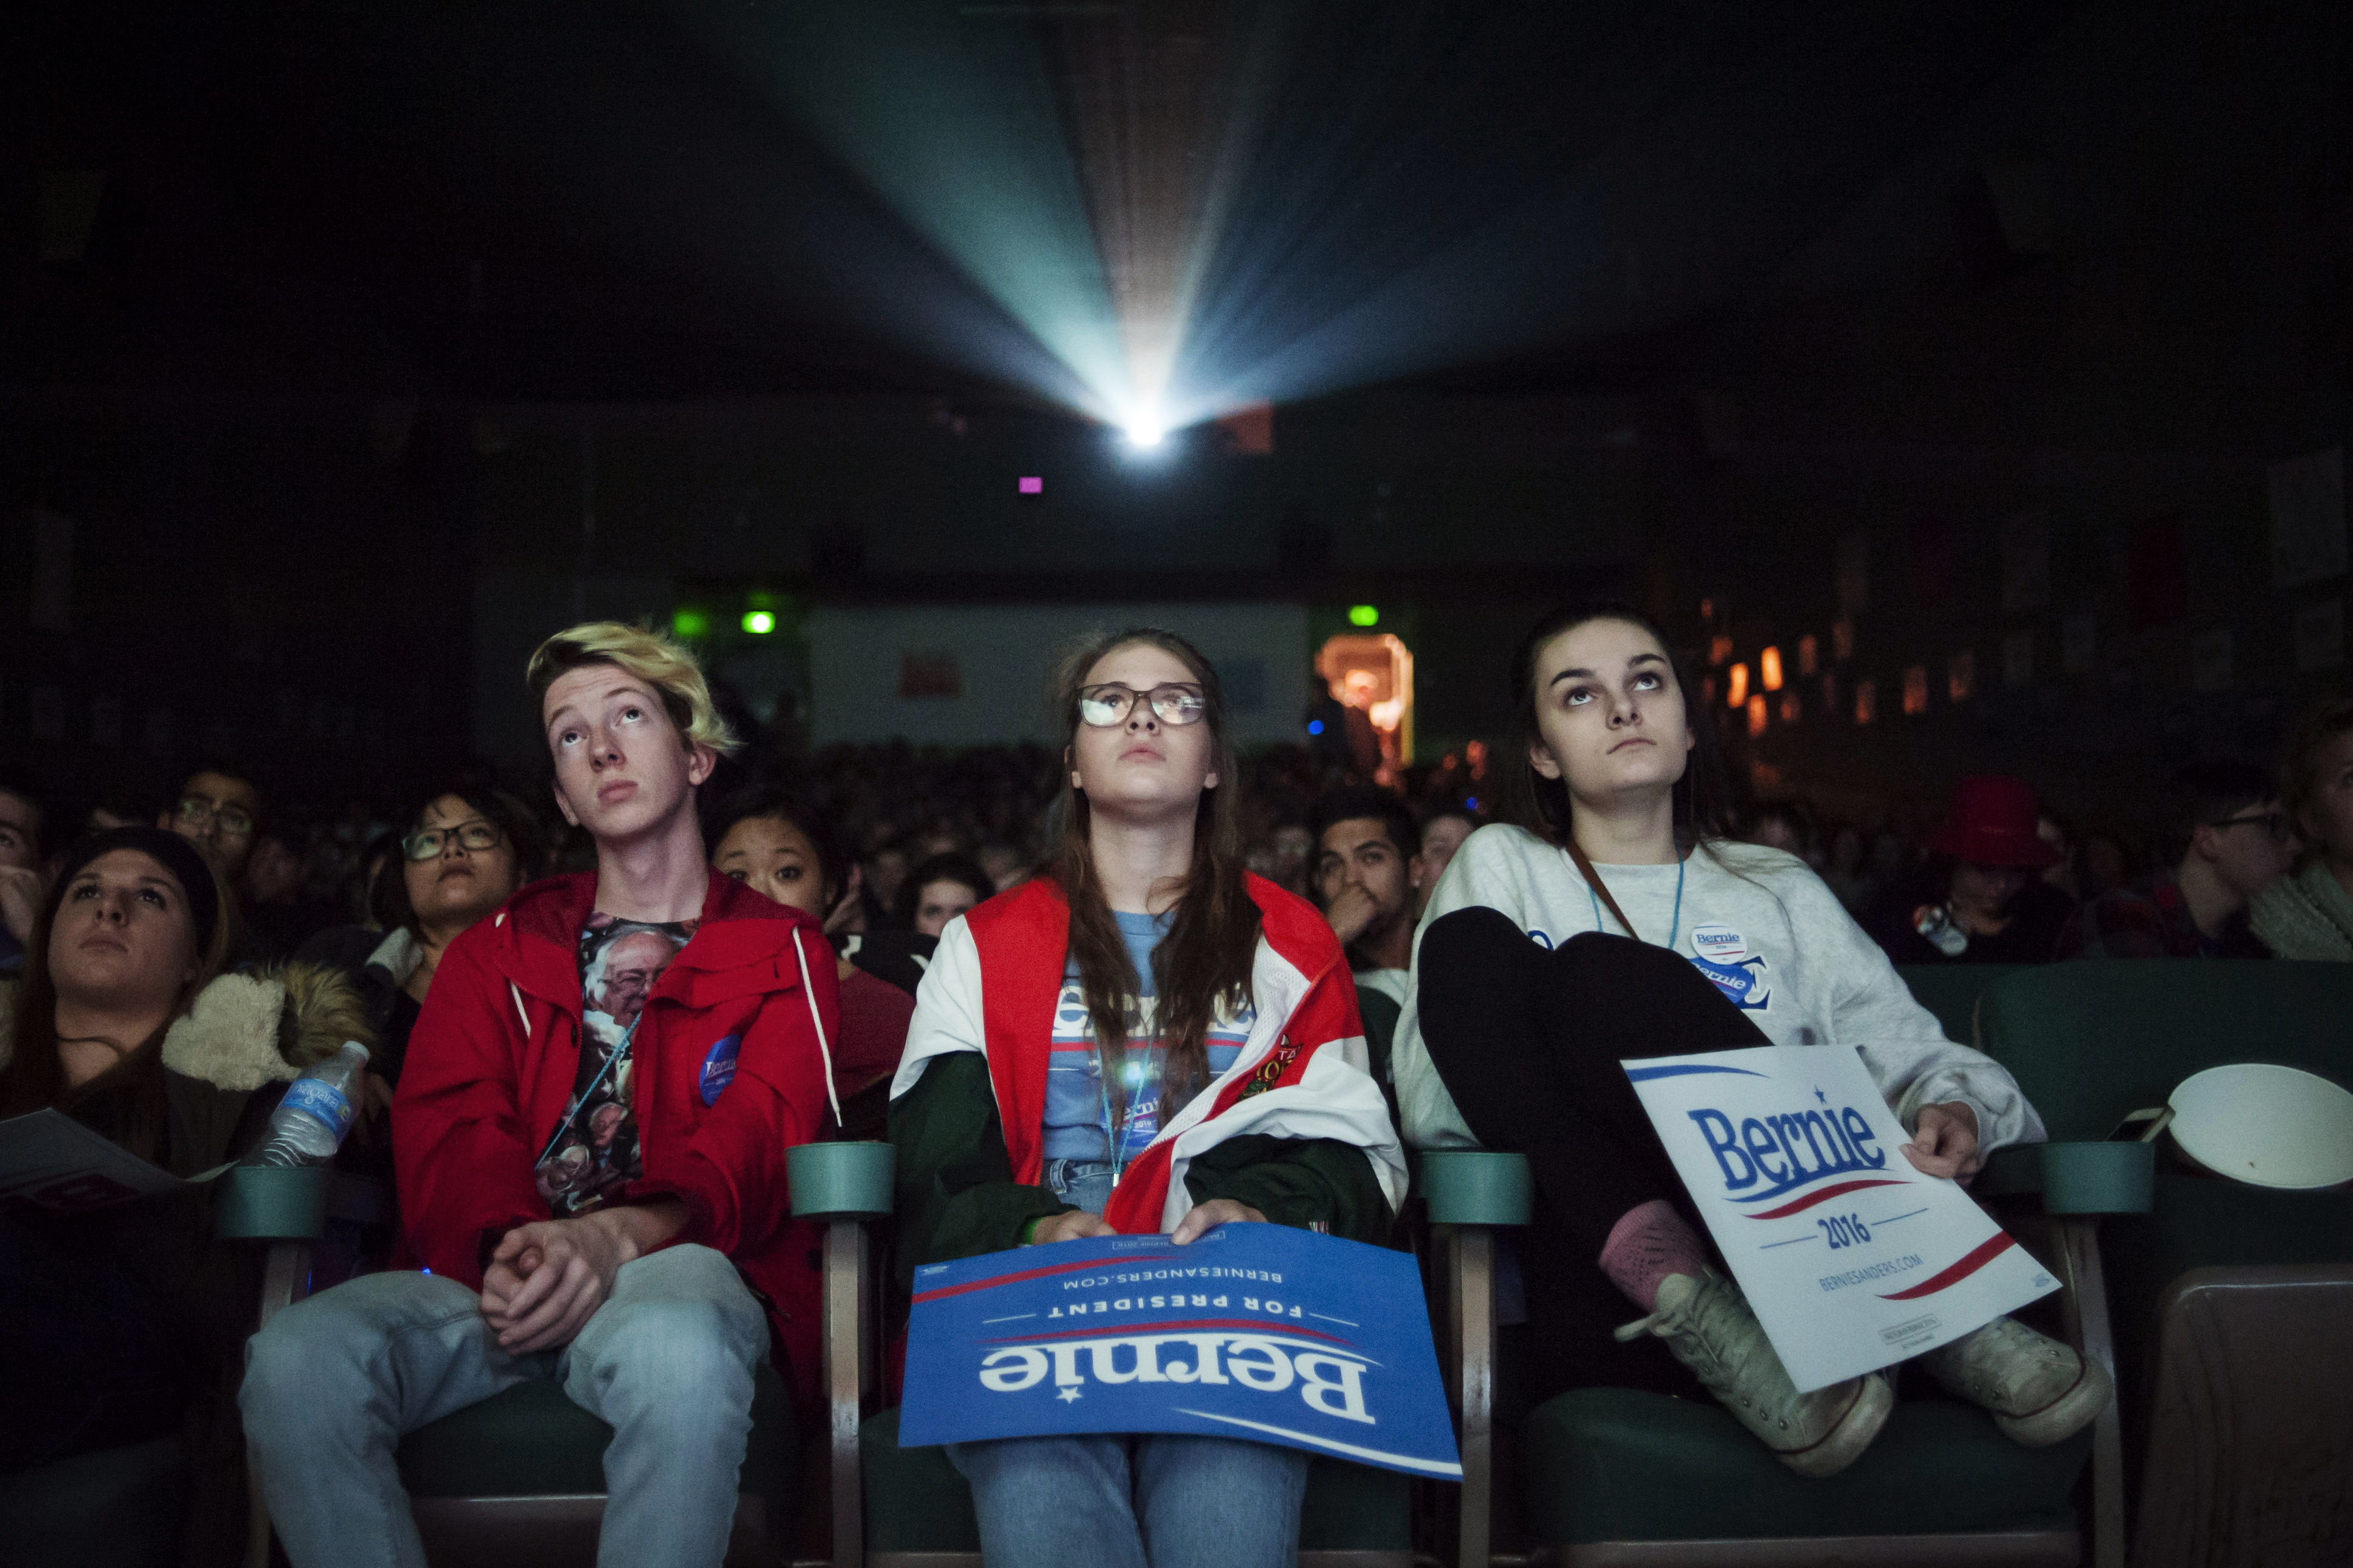 Jonah Guy, Deni Baird, and Lenin Cardwell watch a debate on a movie screen during a watch event in support of Democratic presidential candidate, Vermont Sen. Bernie Sanders in Des Moines, Iowa on Nov. 14, 2015.